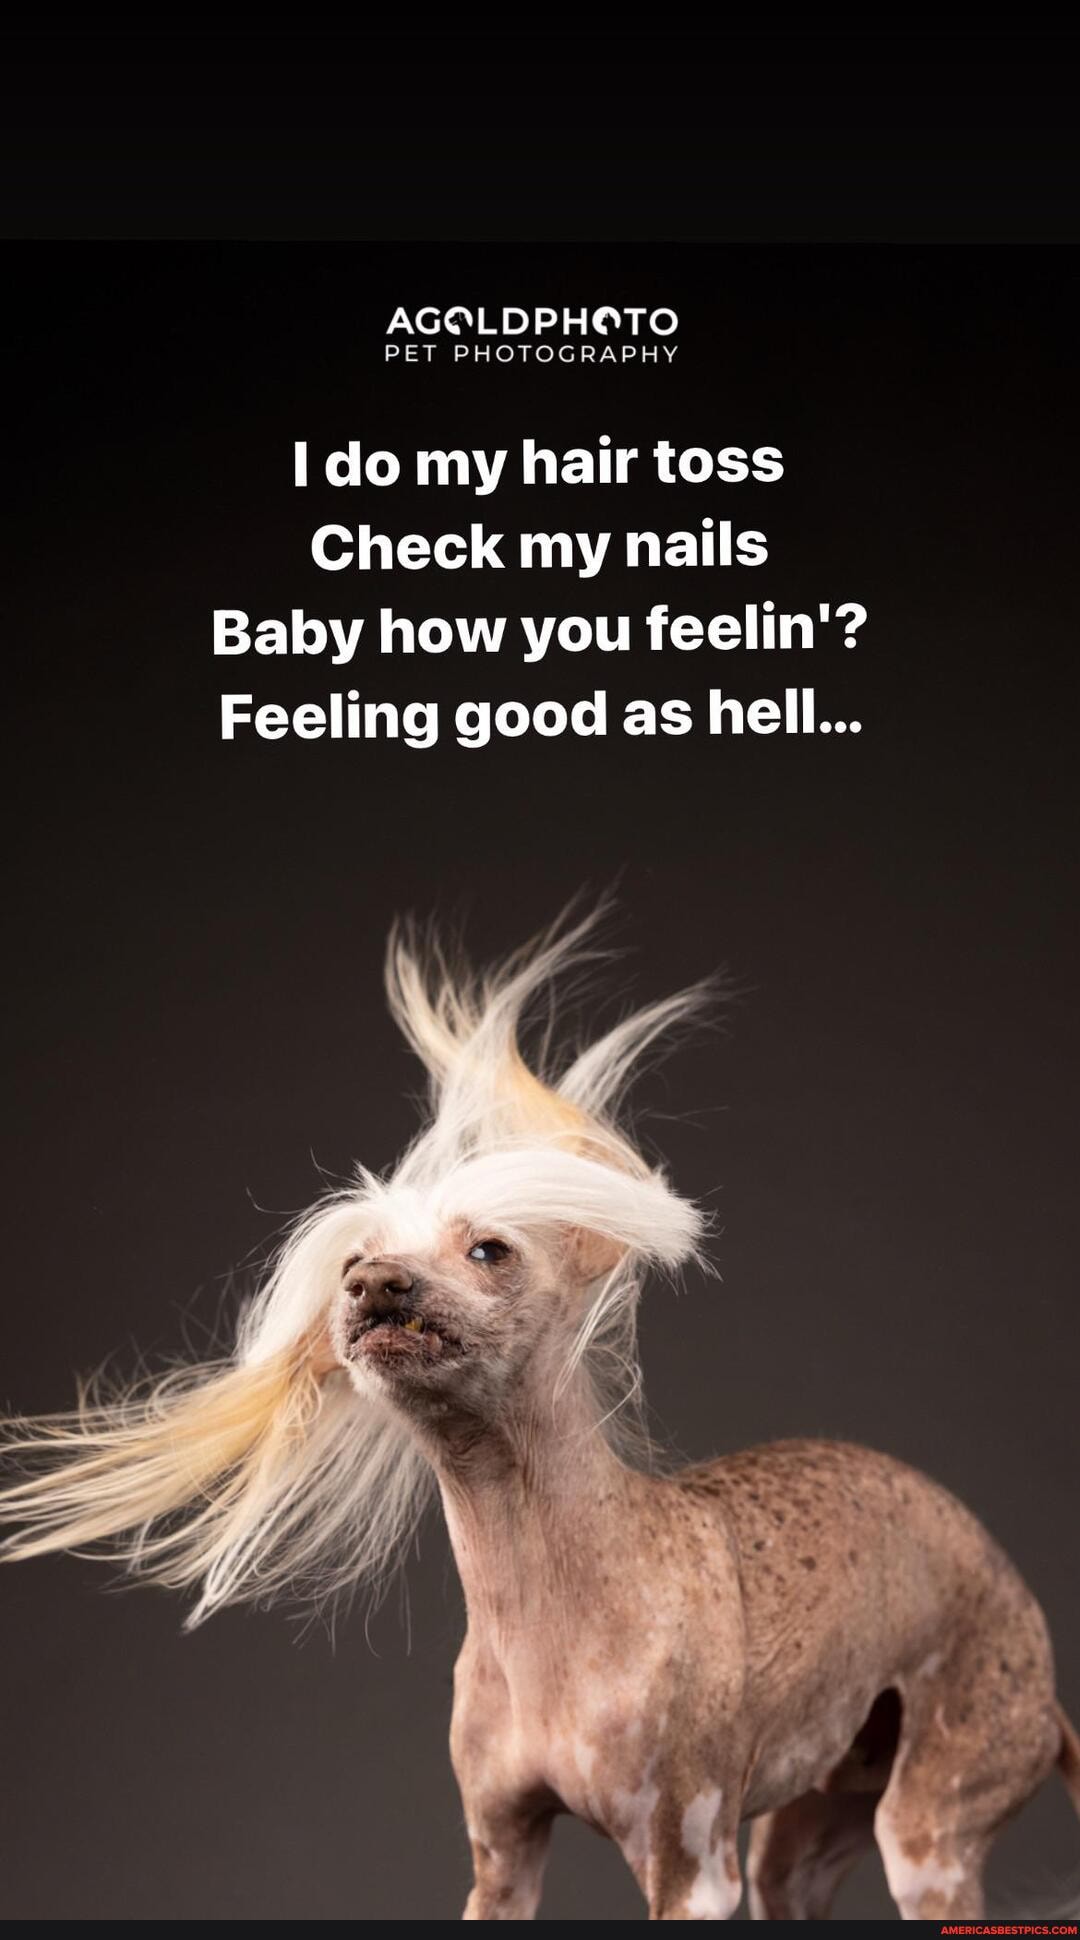 AGOLDPHOTO PET PHOTOGRAPHY do my hair toss Check my nails Baby how you  feelin'? Feeling good as hell... We 